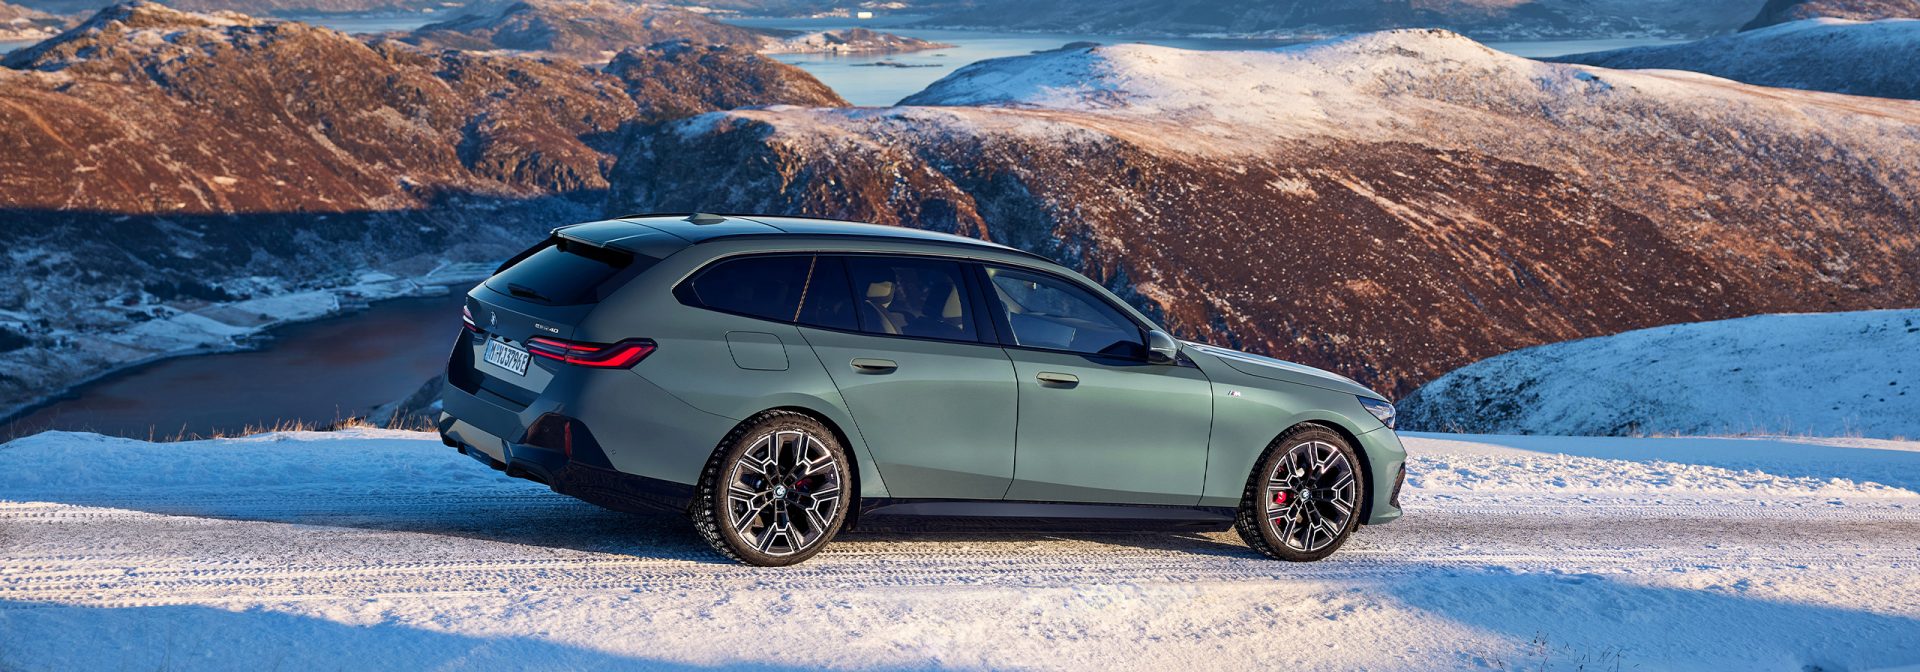 A BMW i5 Touring in metallic green on the road in a snowy mountain landscape. 